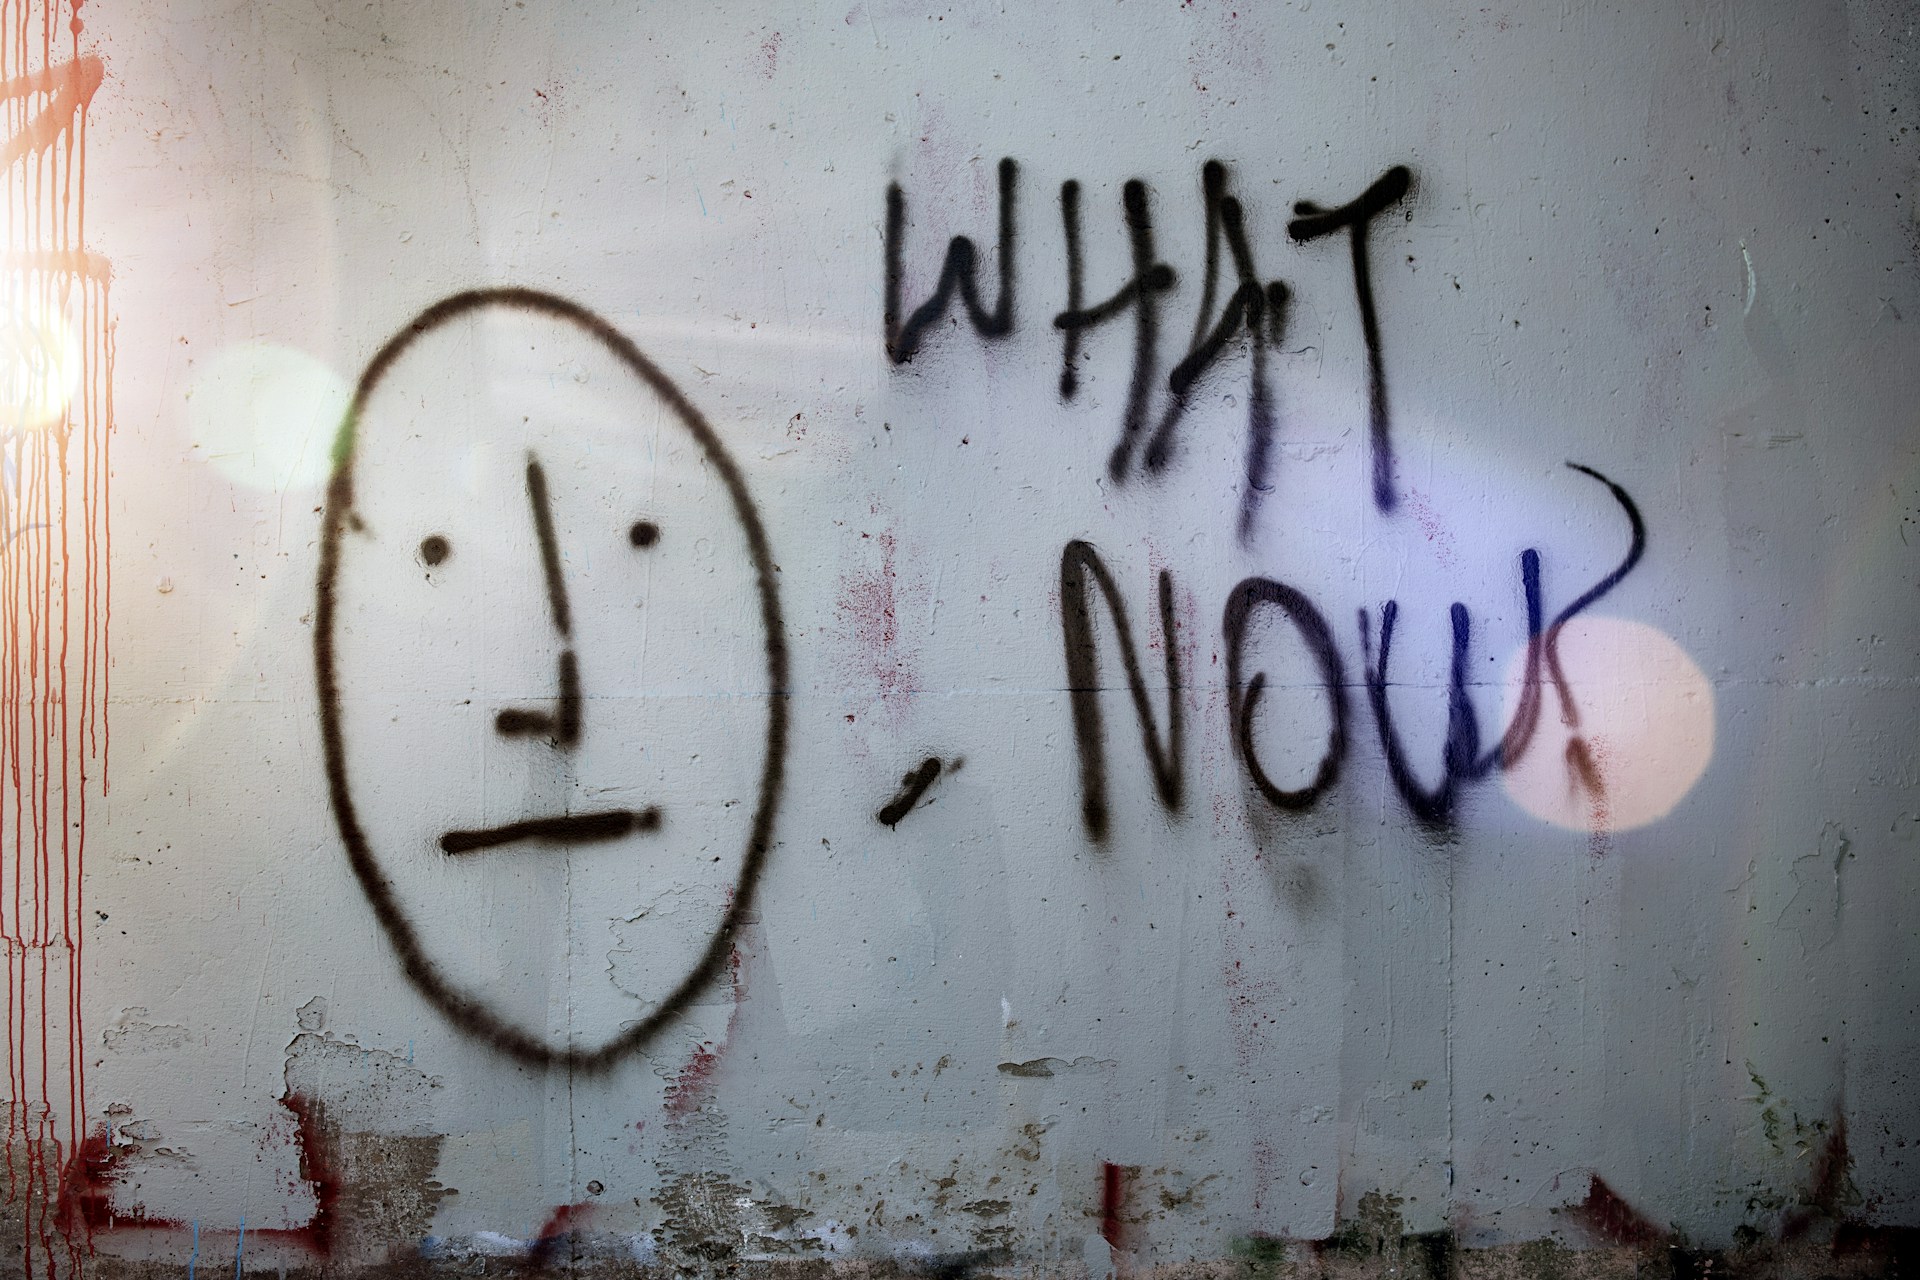 Image shows graffiti that reads "What now?" to illustrate the idea that writers aren't sure what to do after their manuscript is rejected by a publisher.